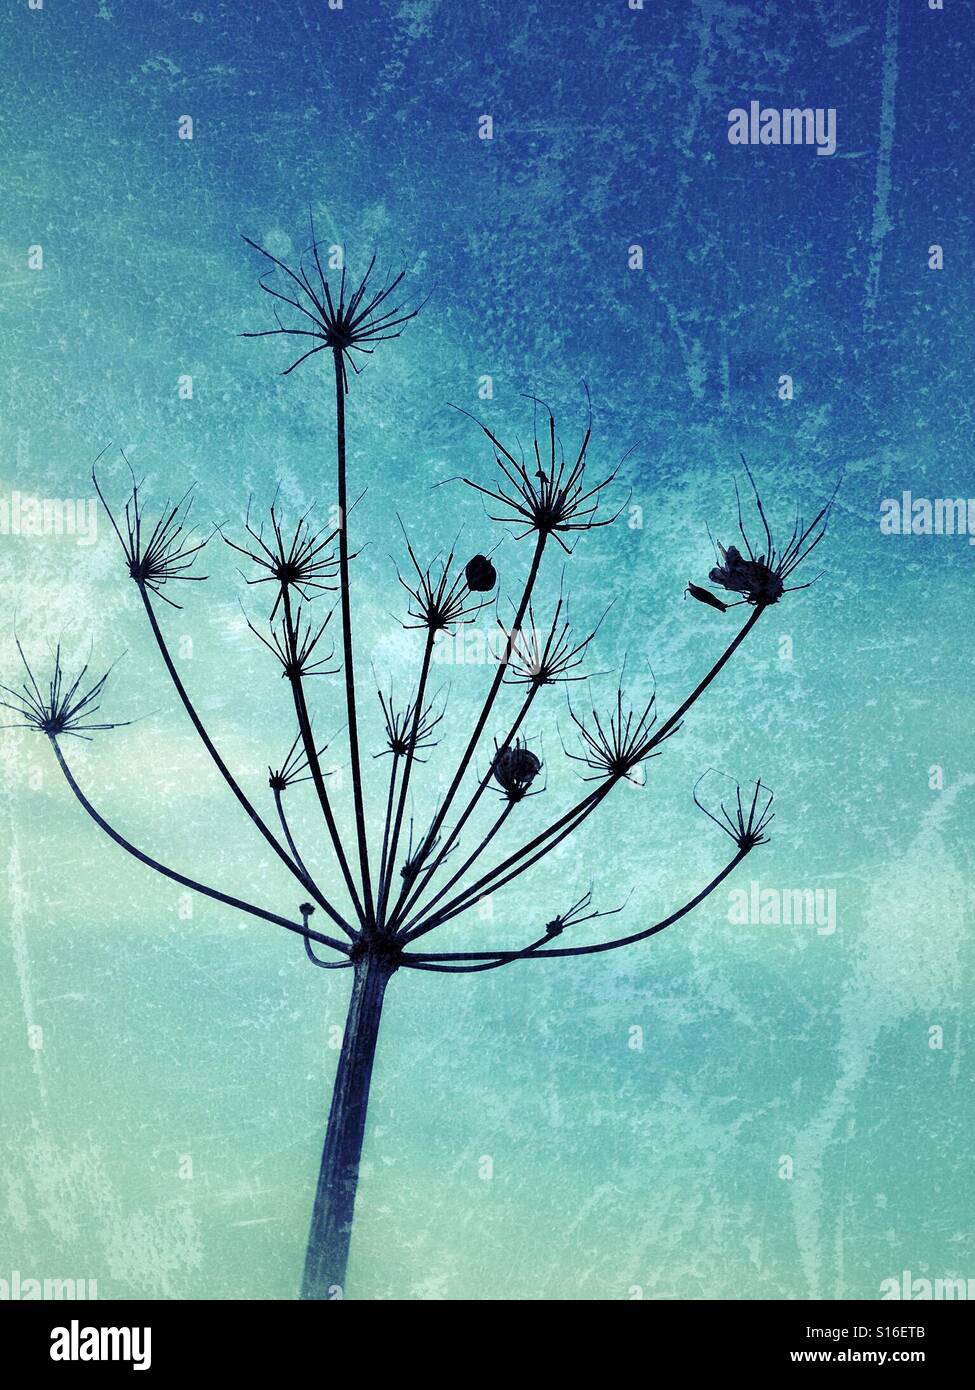 Umbellifer seedhead against a frosty, blue background Stock Photo